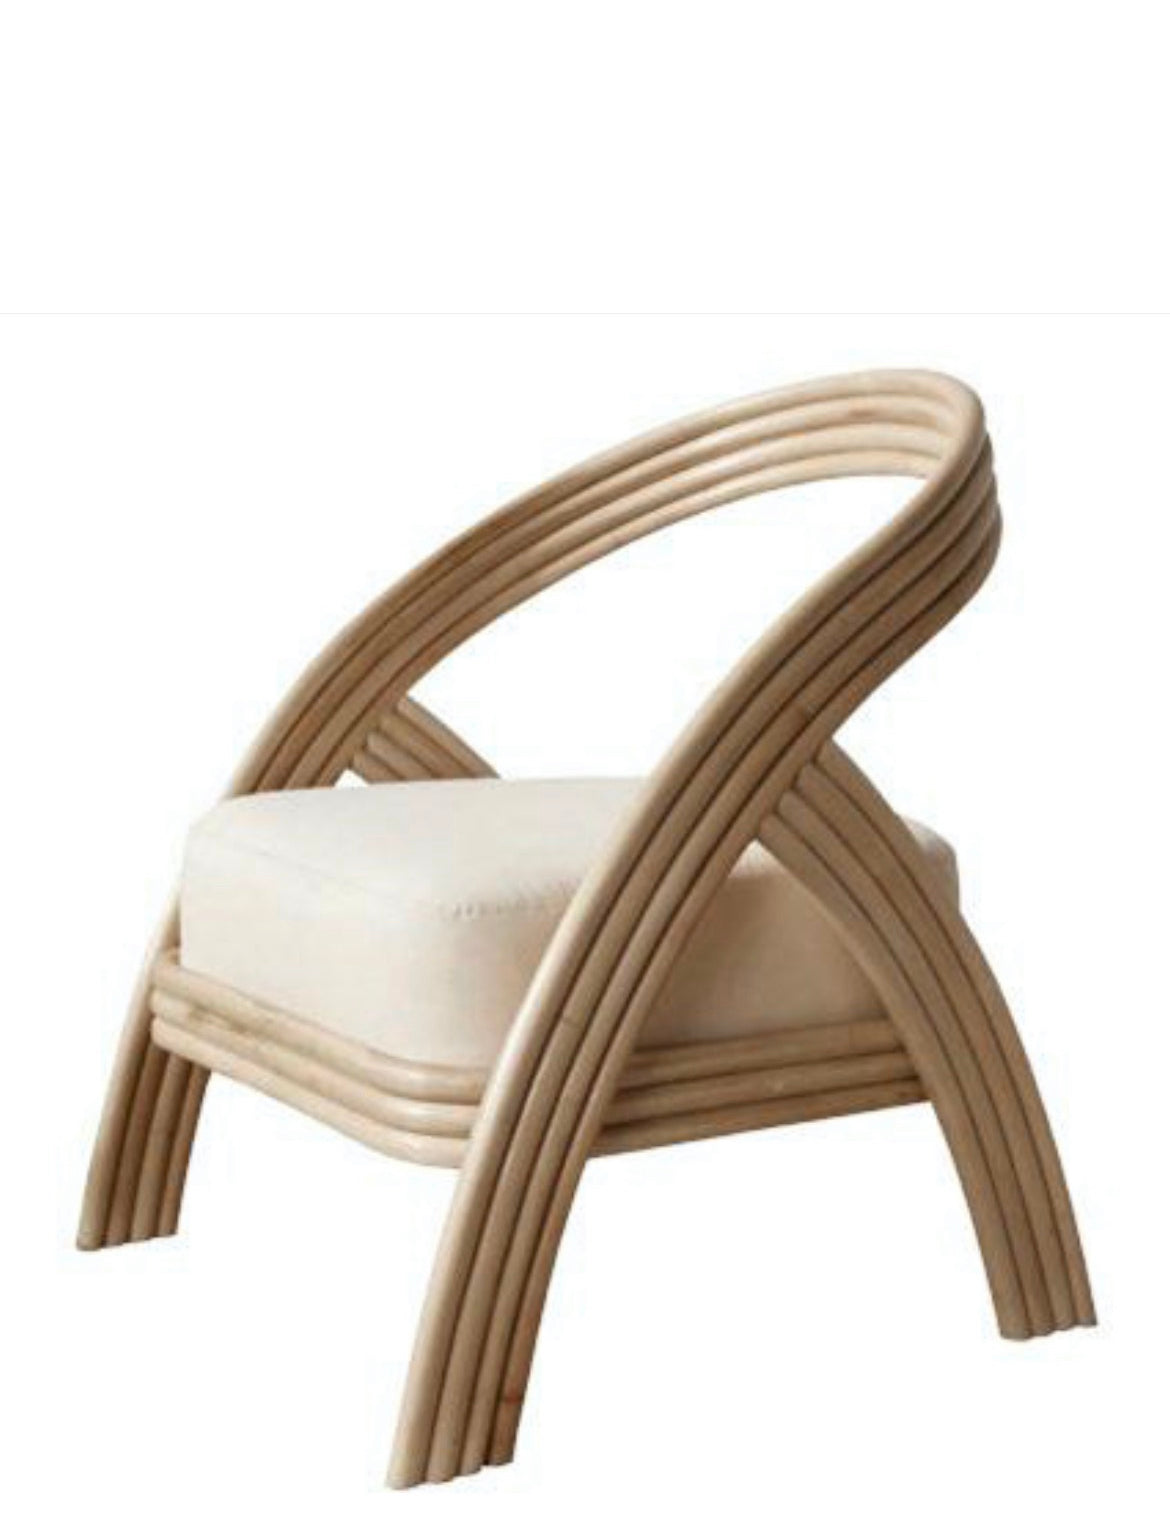 Indi Chair with seat cushion